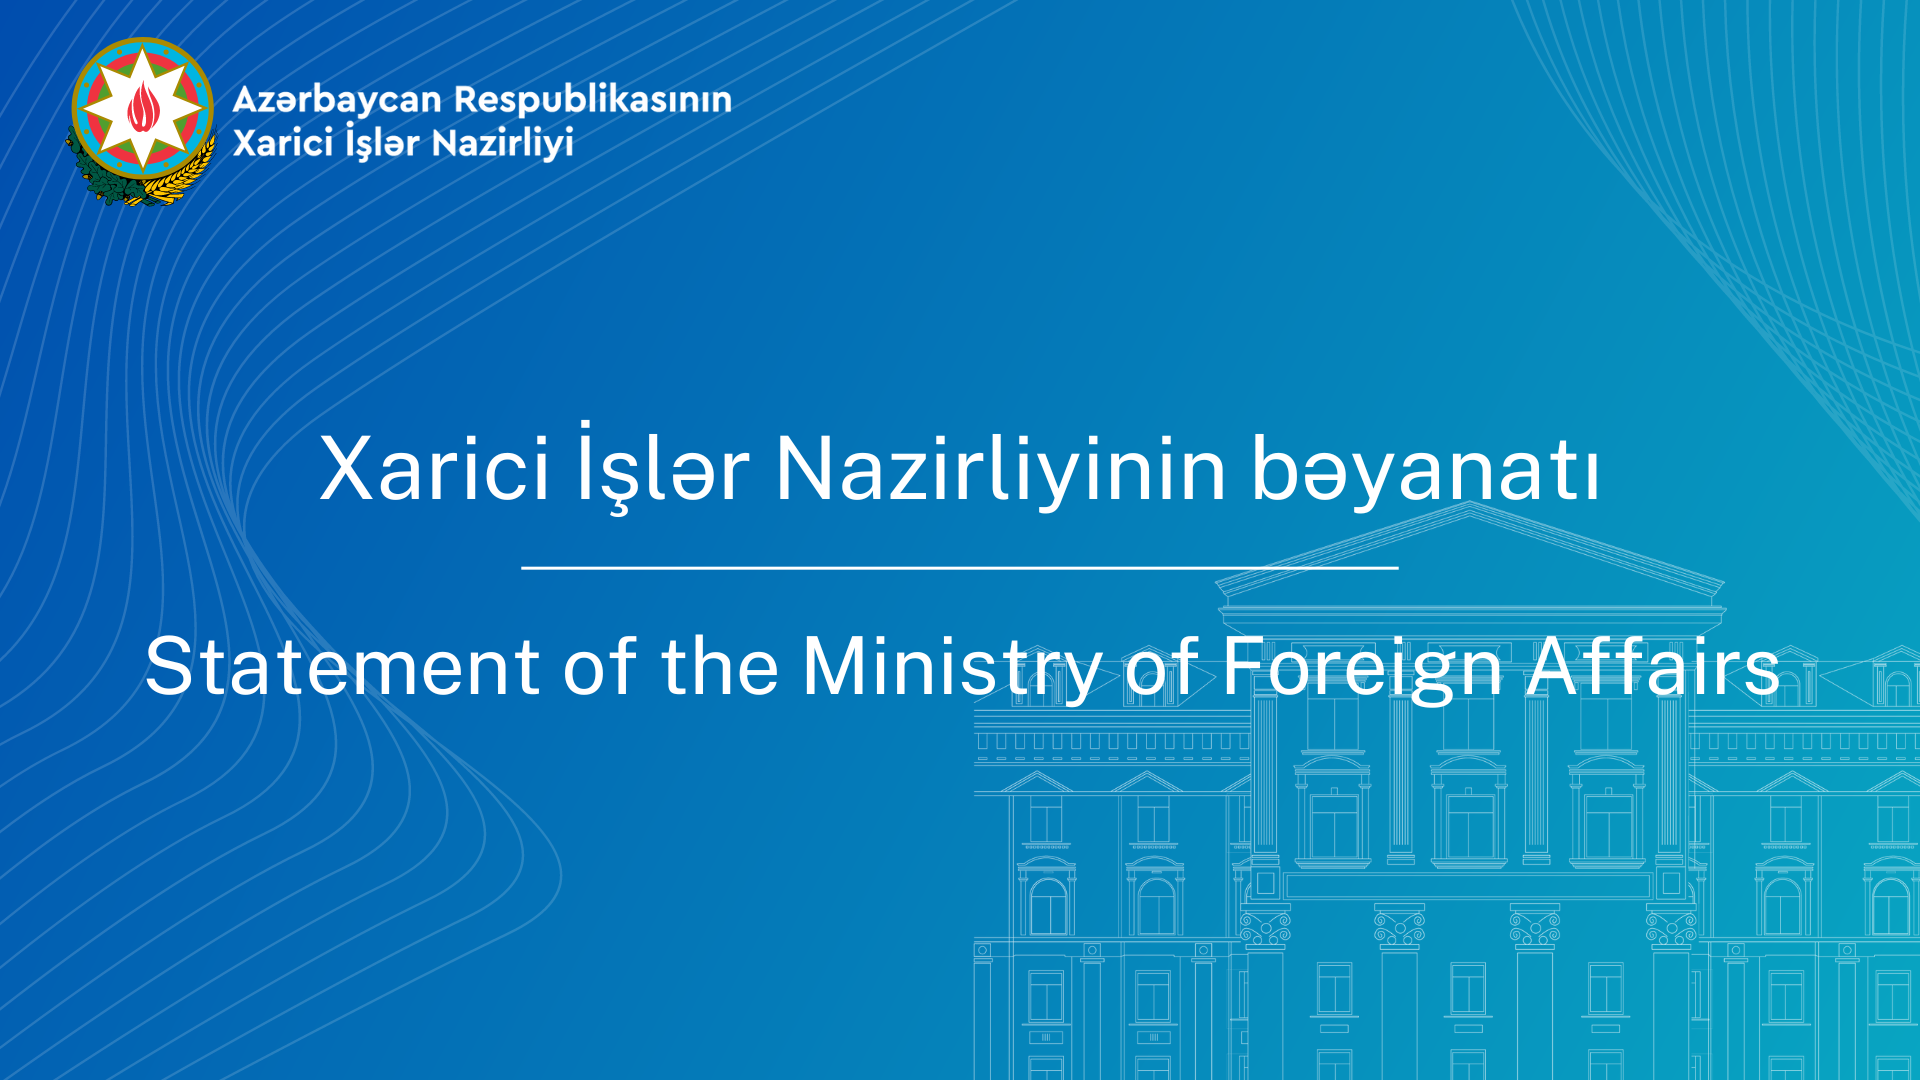 No:434/23, Statement of the Ministry of Foreign Affairs of the Republic of Azerbaijan Xeber basligi